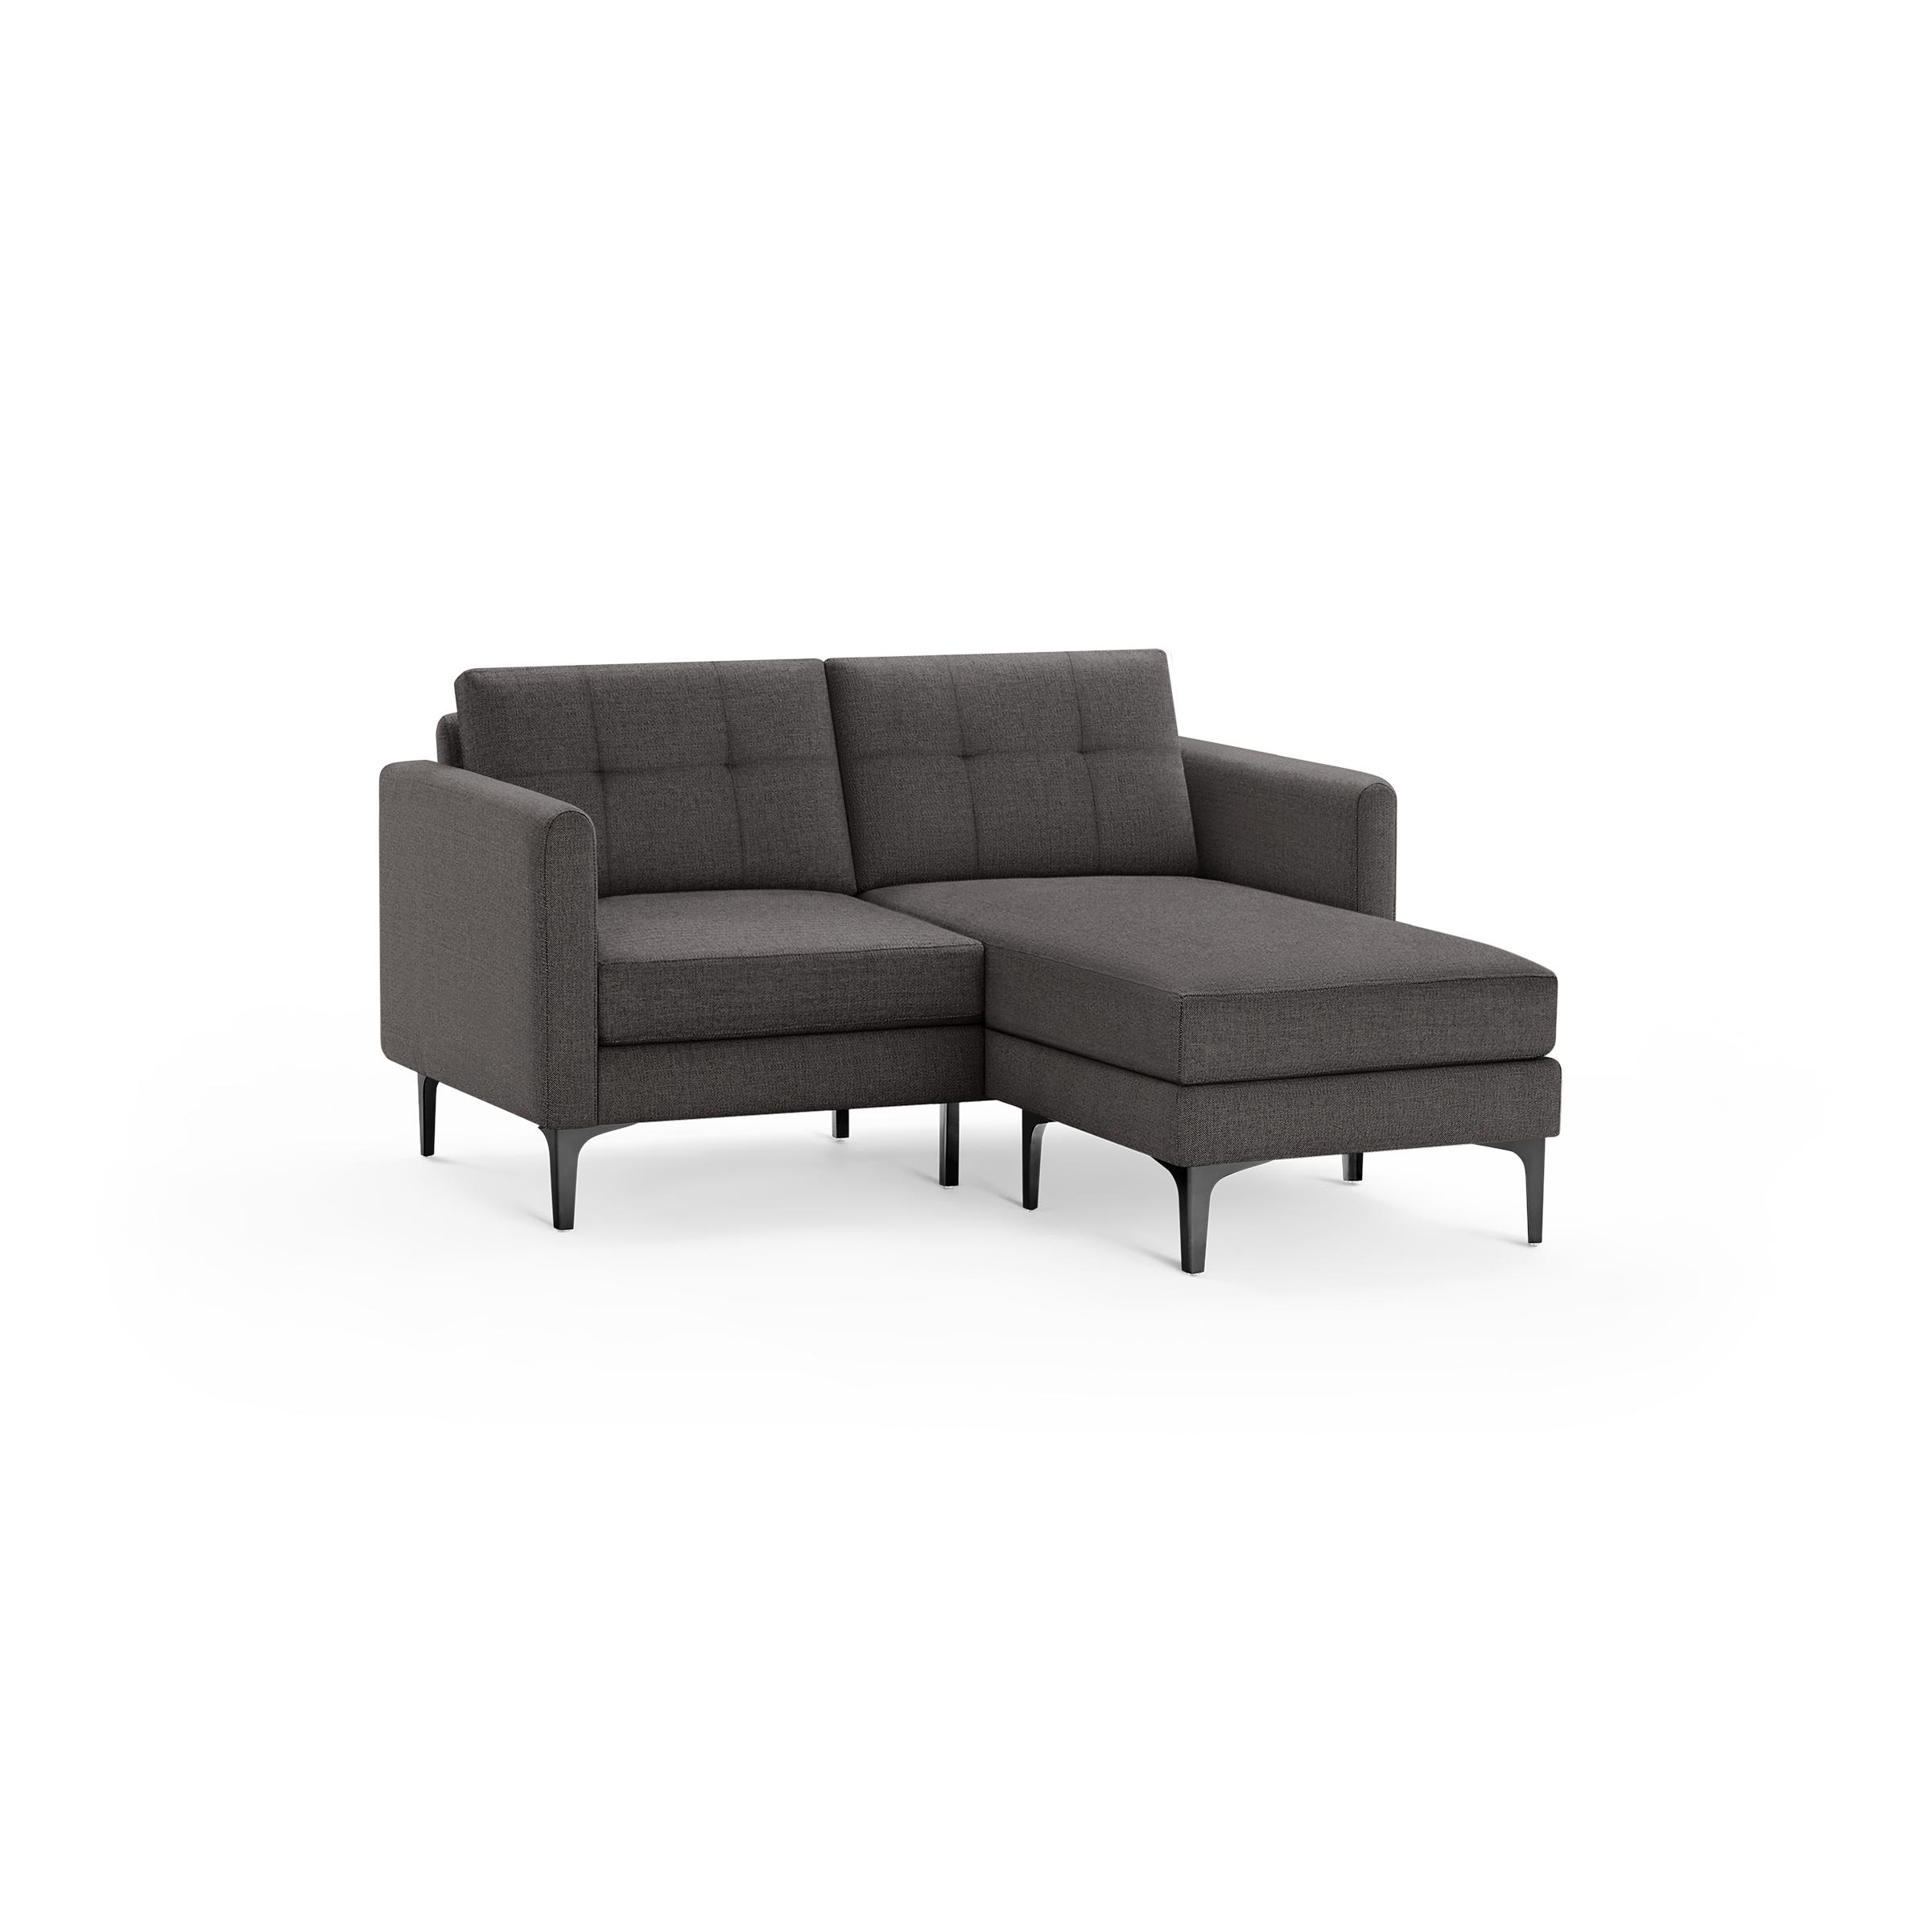 Nomad Loveseat with Chaise in Charcoal - Image 1